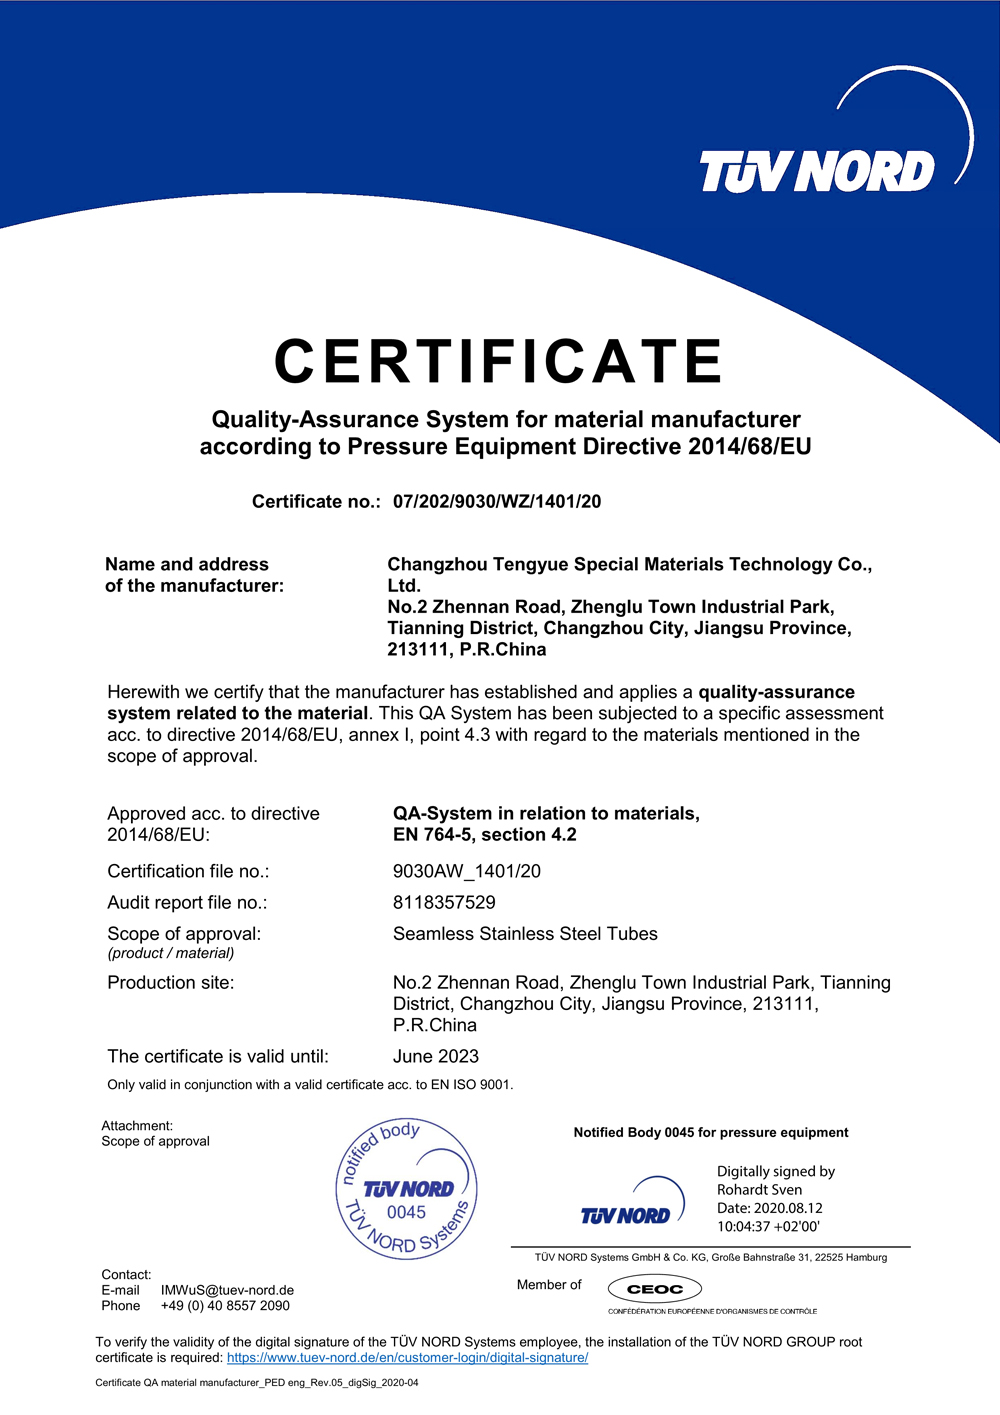 PED & ISO9001 Certificates have been Updated on July, 2020